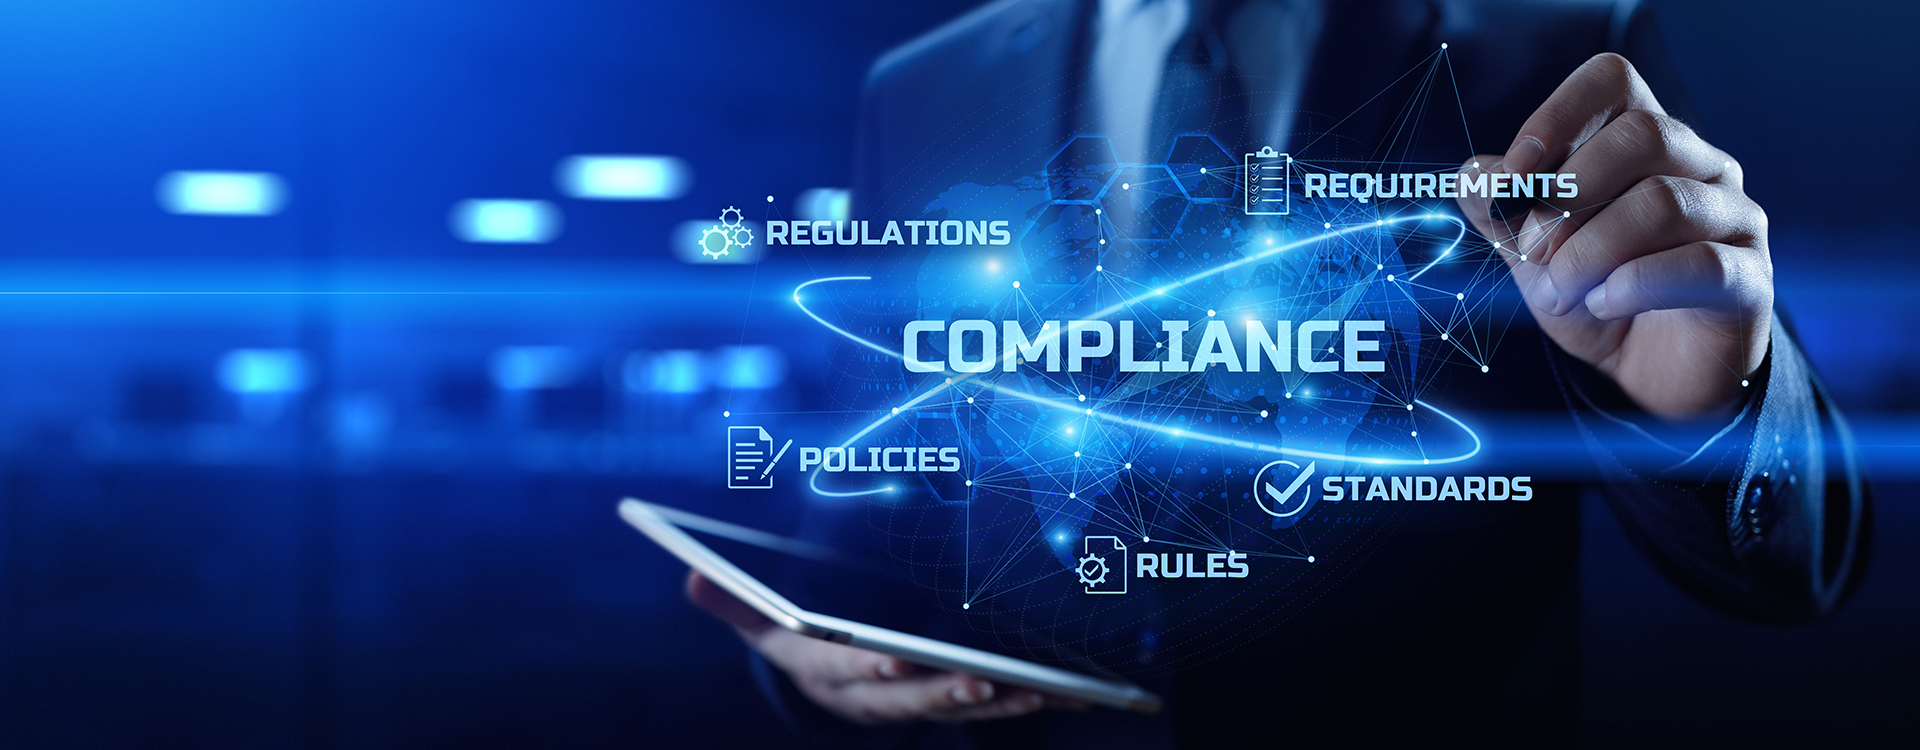 Business Compliance Services help businesses meet regulatory requirements for banks and other stakeholders